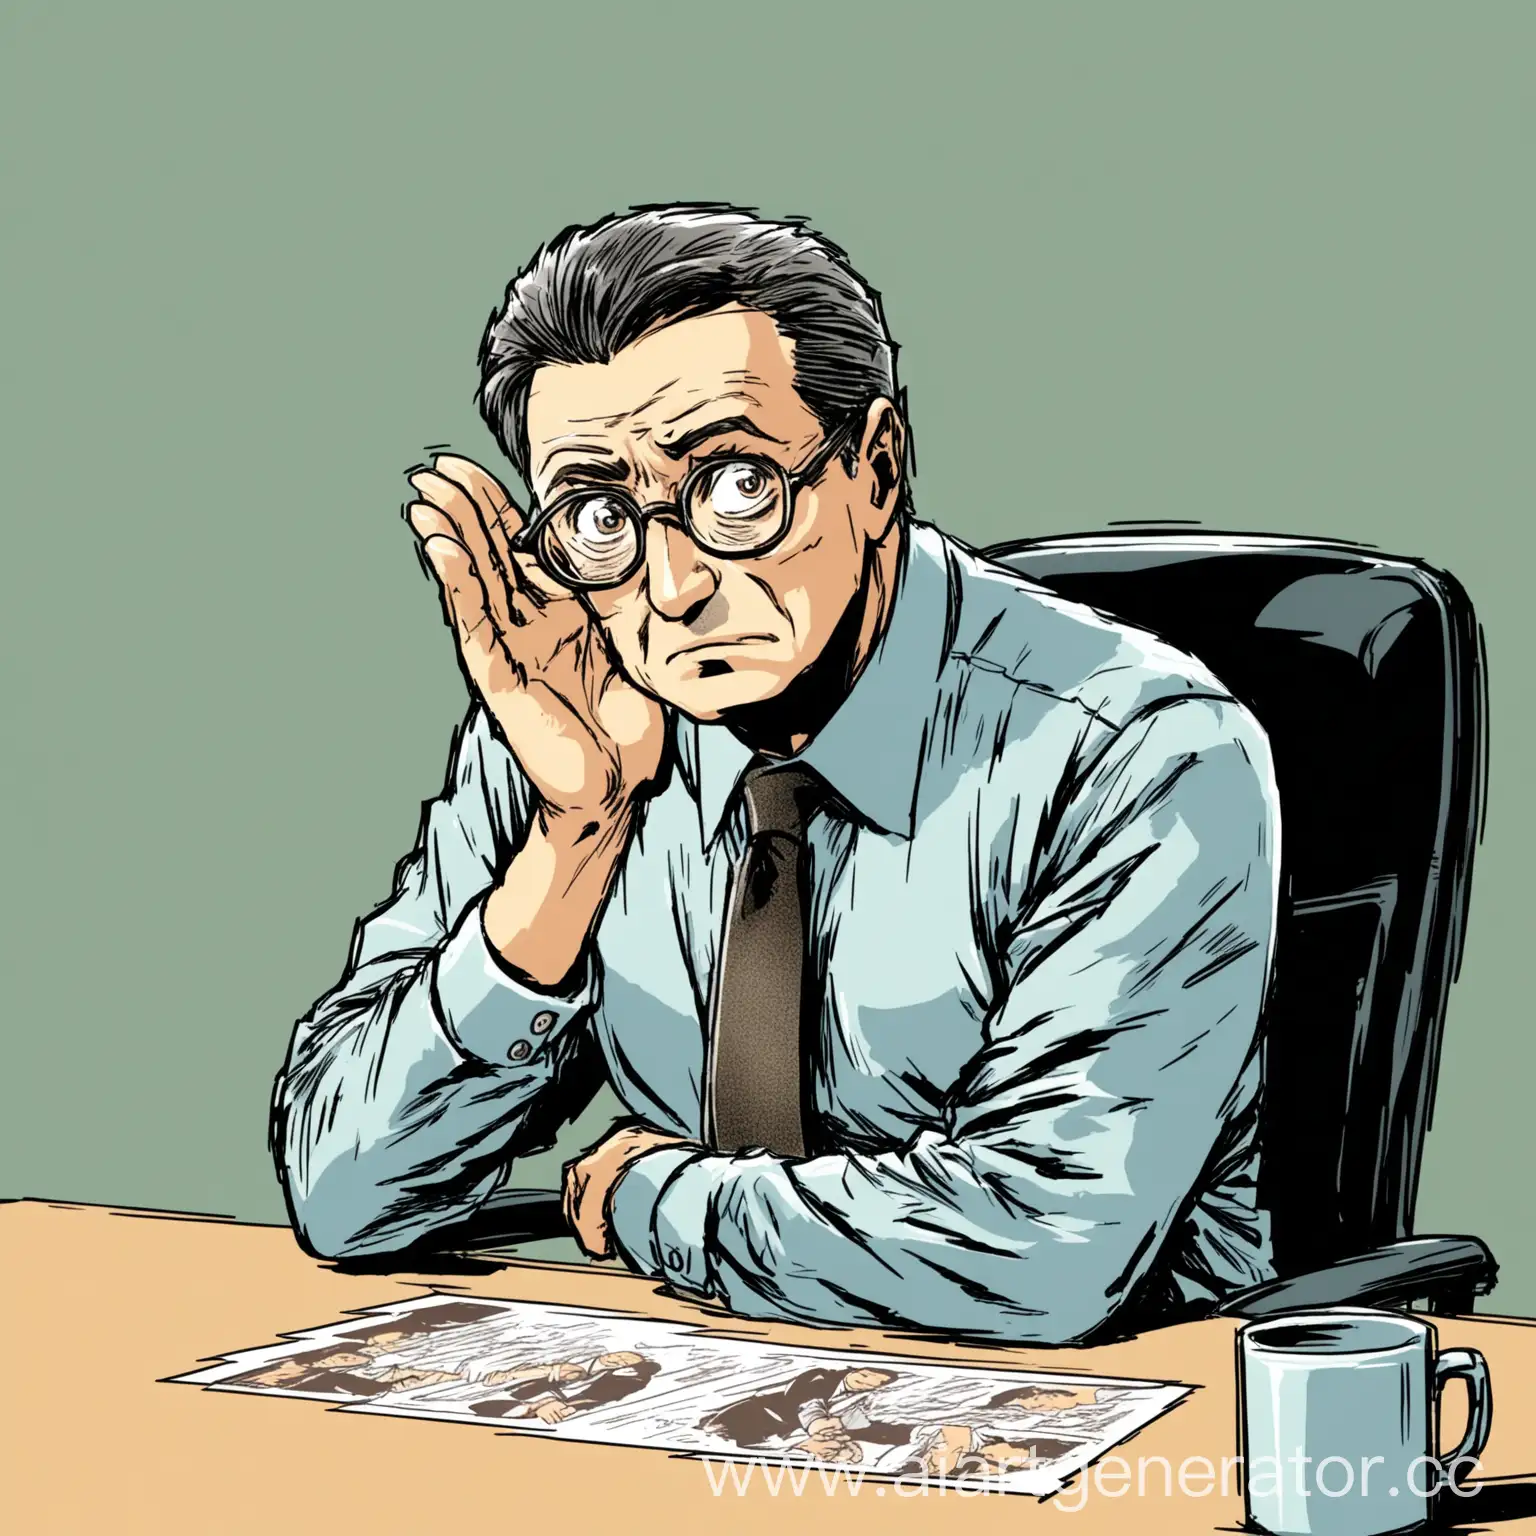 Middleaged-Man-Pesters-Calmly-in-Office-Scene